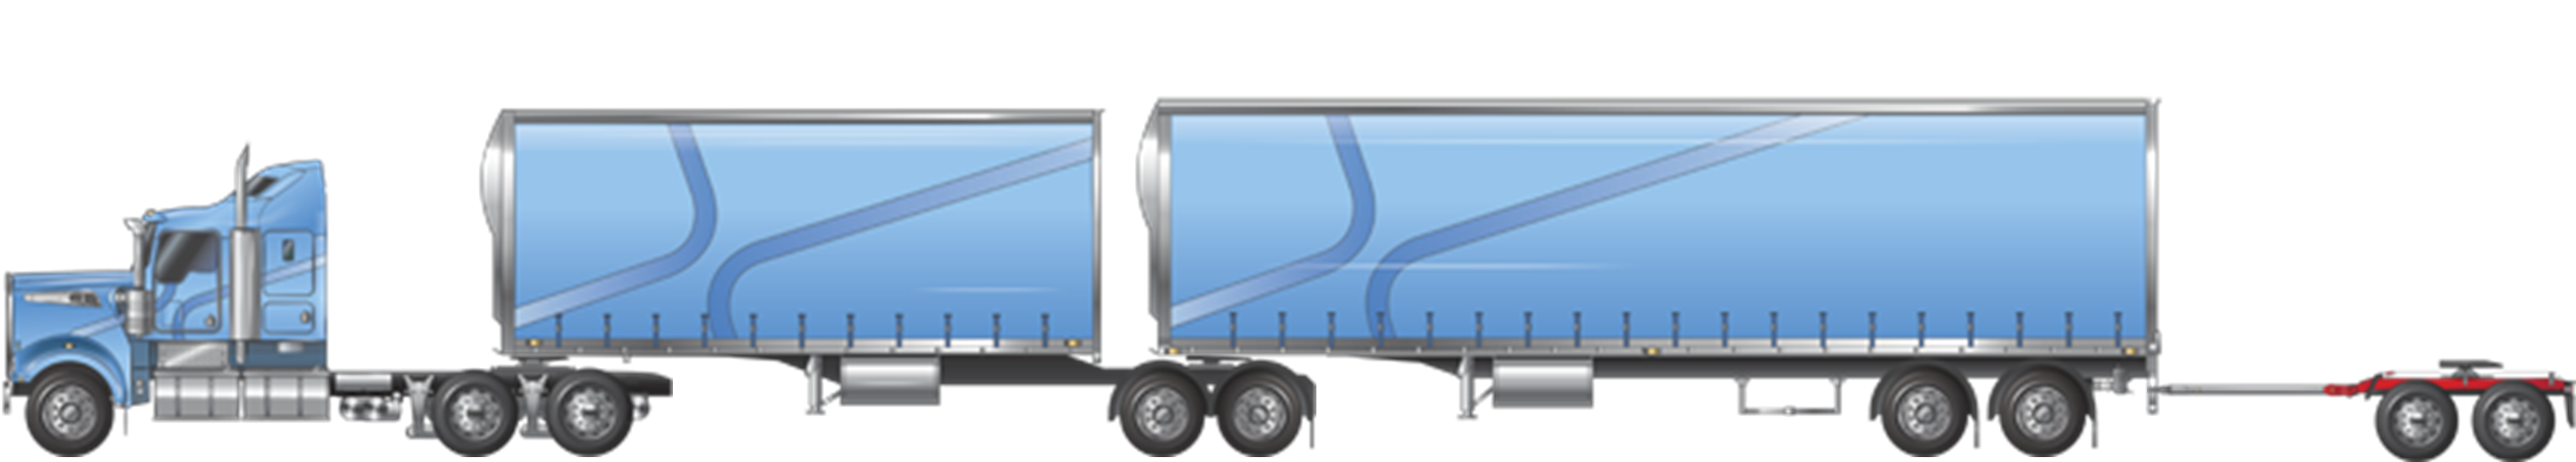 Image is displaying a B-double 1-2 towing a tandem axle unladen converter dolly.